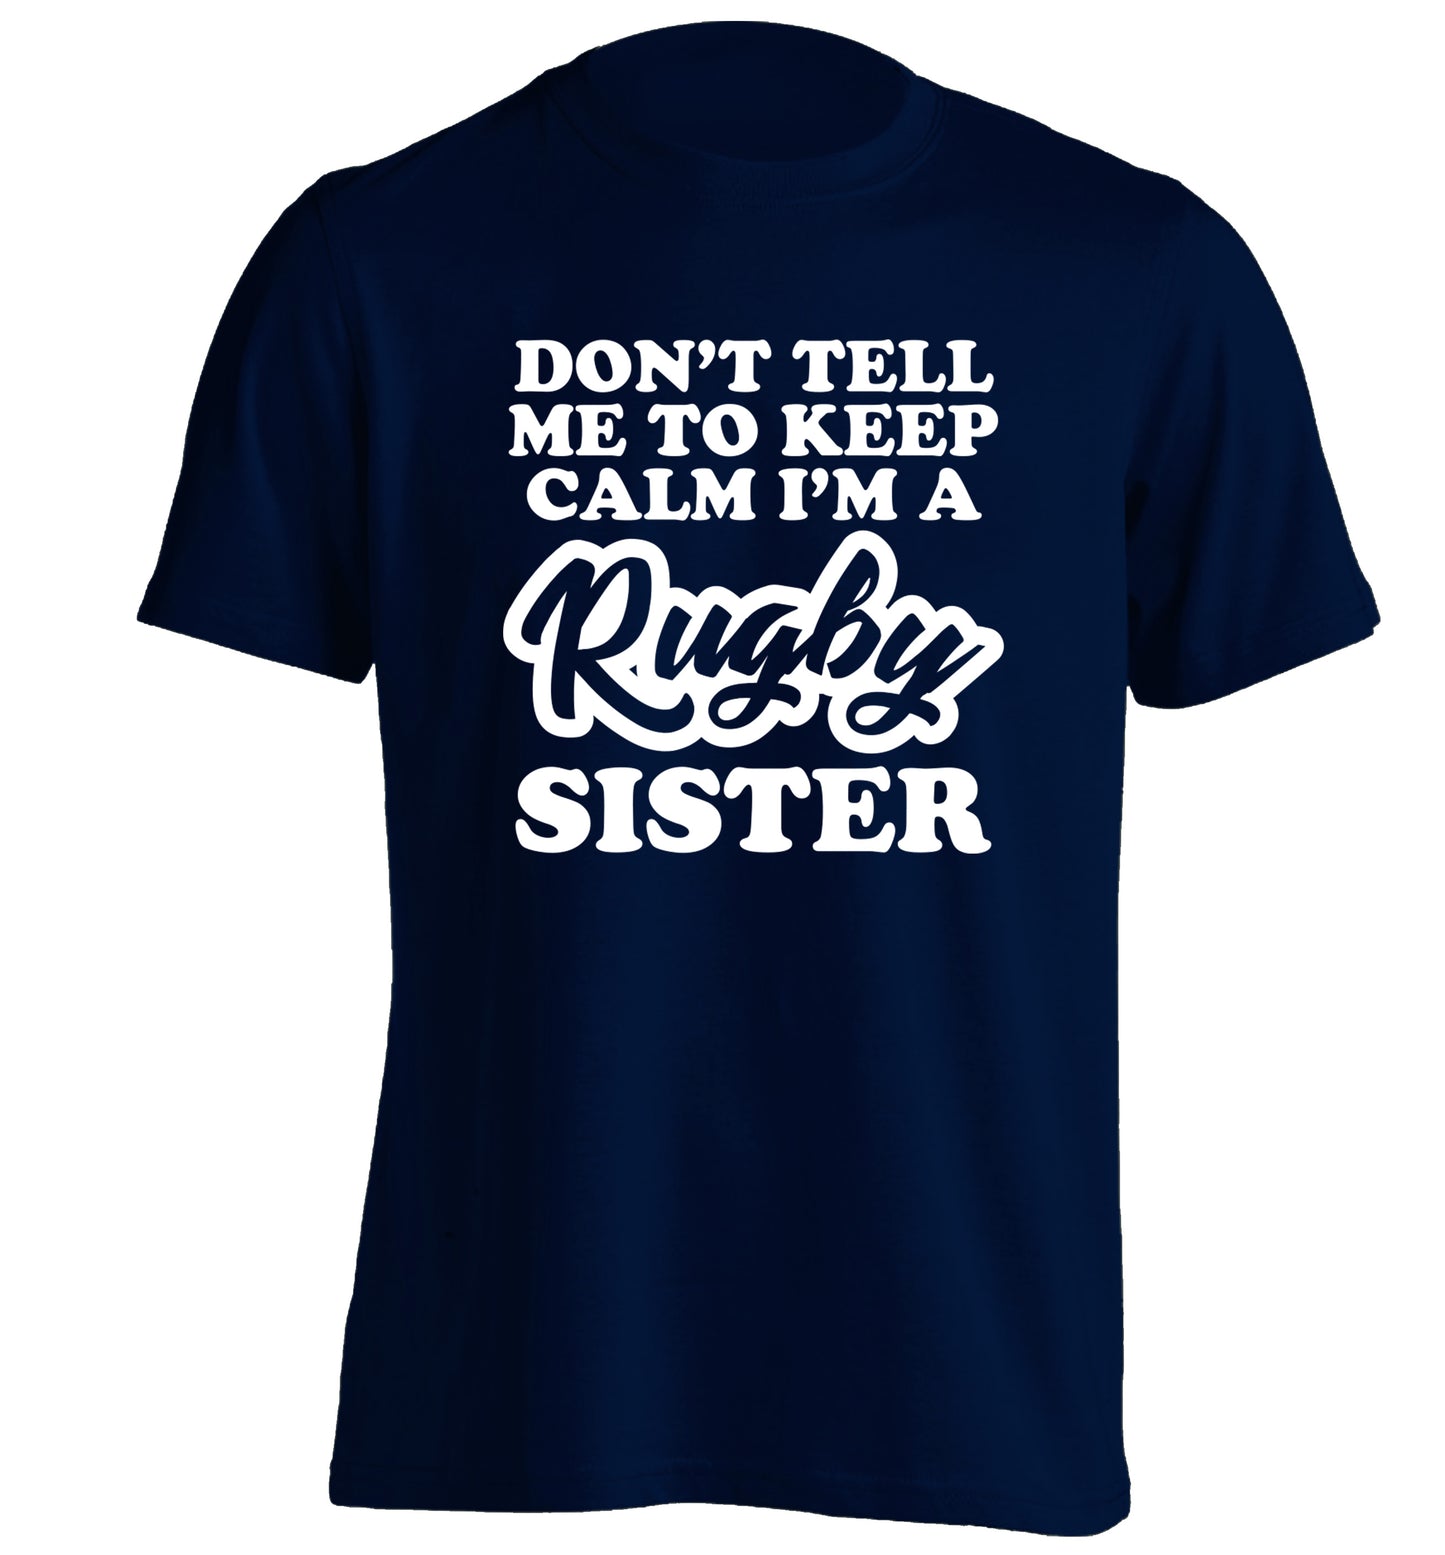 Don't tell me keep calm I'm a rugby sister adults unisex navy Tshirt 2XL